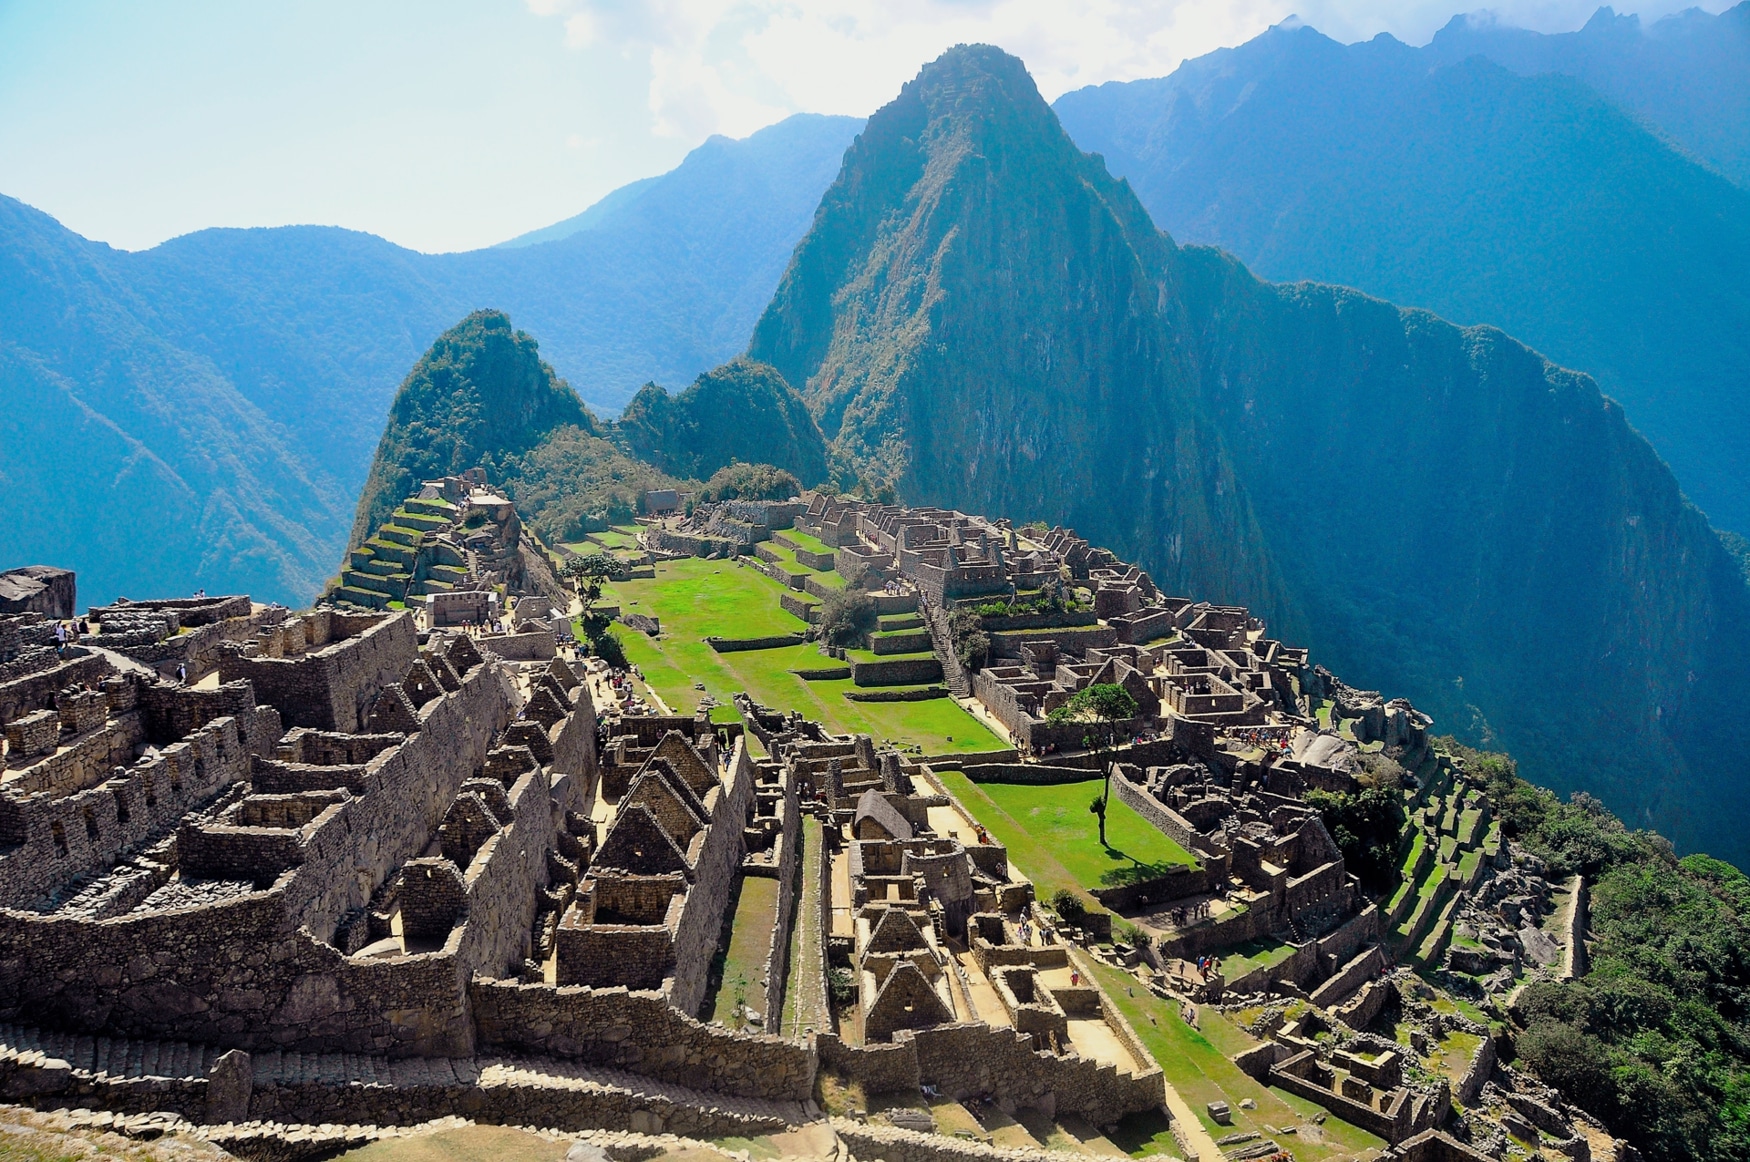 Machu Picchu 101: Everything You Need to Know About Visiting the “Lost City”